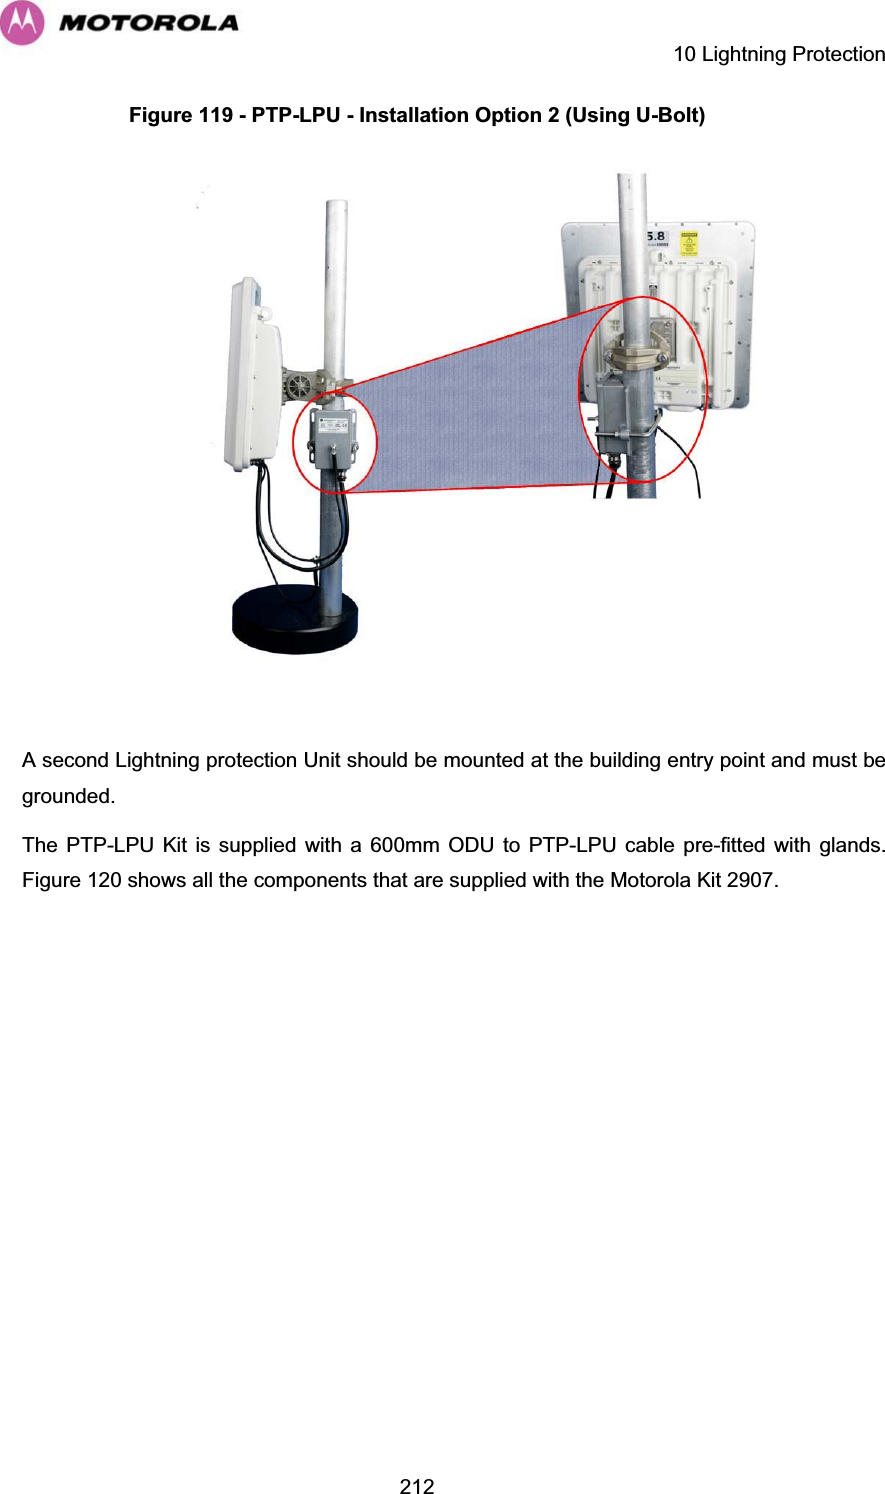    10 Lightning Protection  212Figure 119 - PTP-LPU - Installation Option 2 (Using U-Bolt)   A second Lightning protection Unit should be mounted at the building entry point and must be grounded. The PTP-LPU Kit is supplied with a 600mm ODU to PTP-LPU cable pre-fitted with glands. Figure 120 shows all the components that are supplied with the Motorola Kit 2907.  